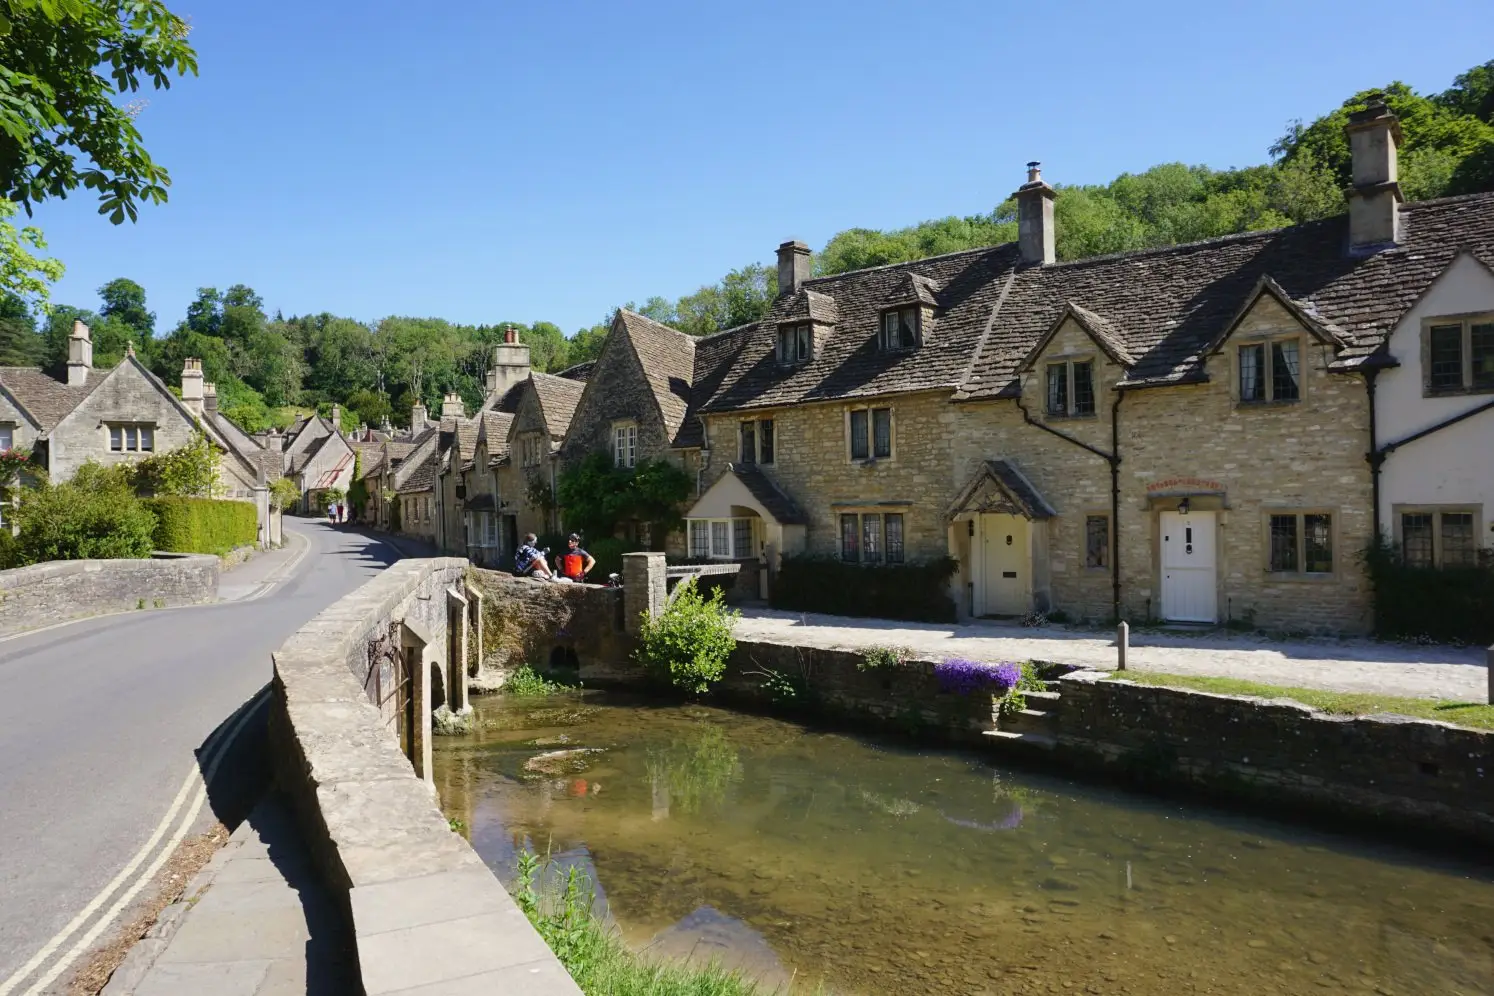 Picturesque Cotswold cottages and charming stream along the main road in Castle Combe